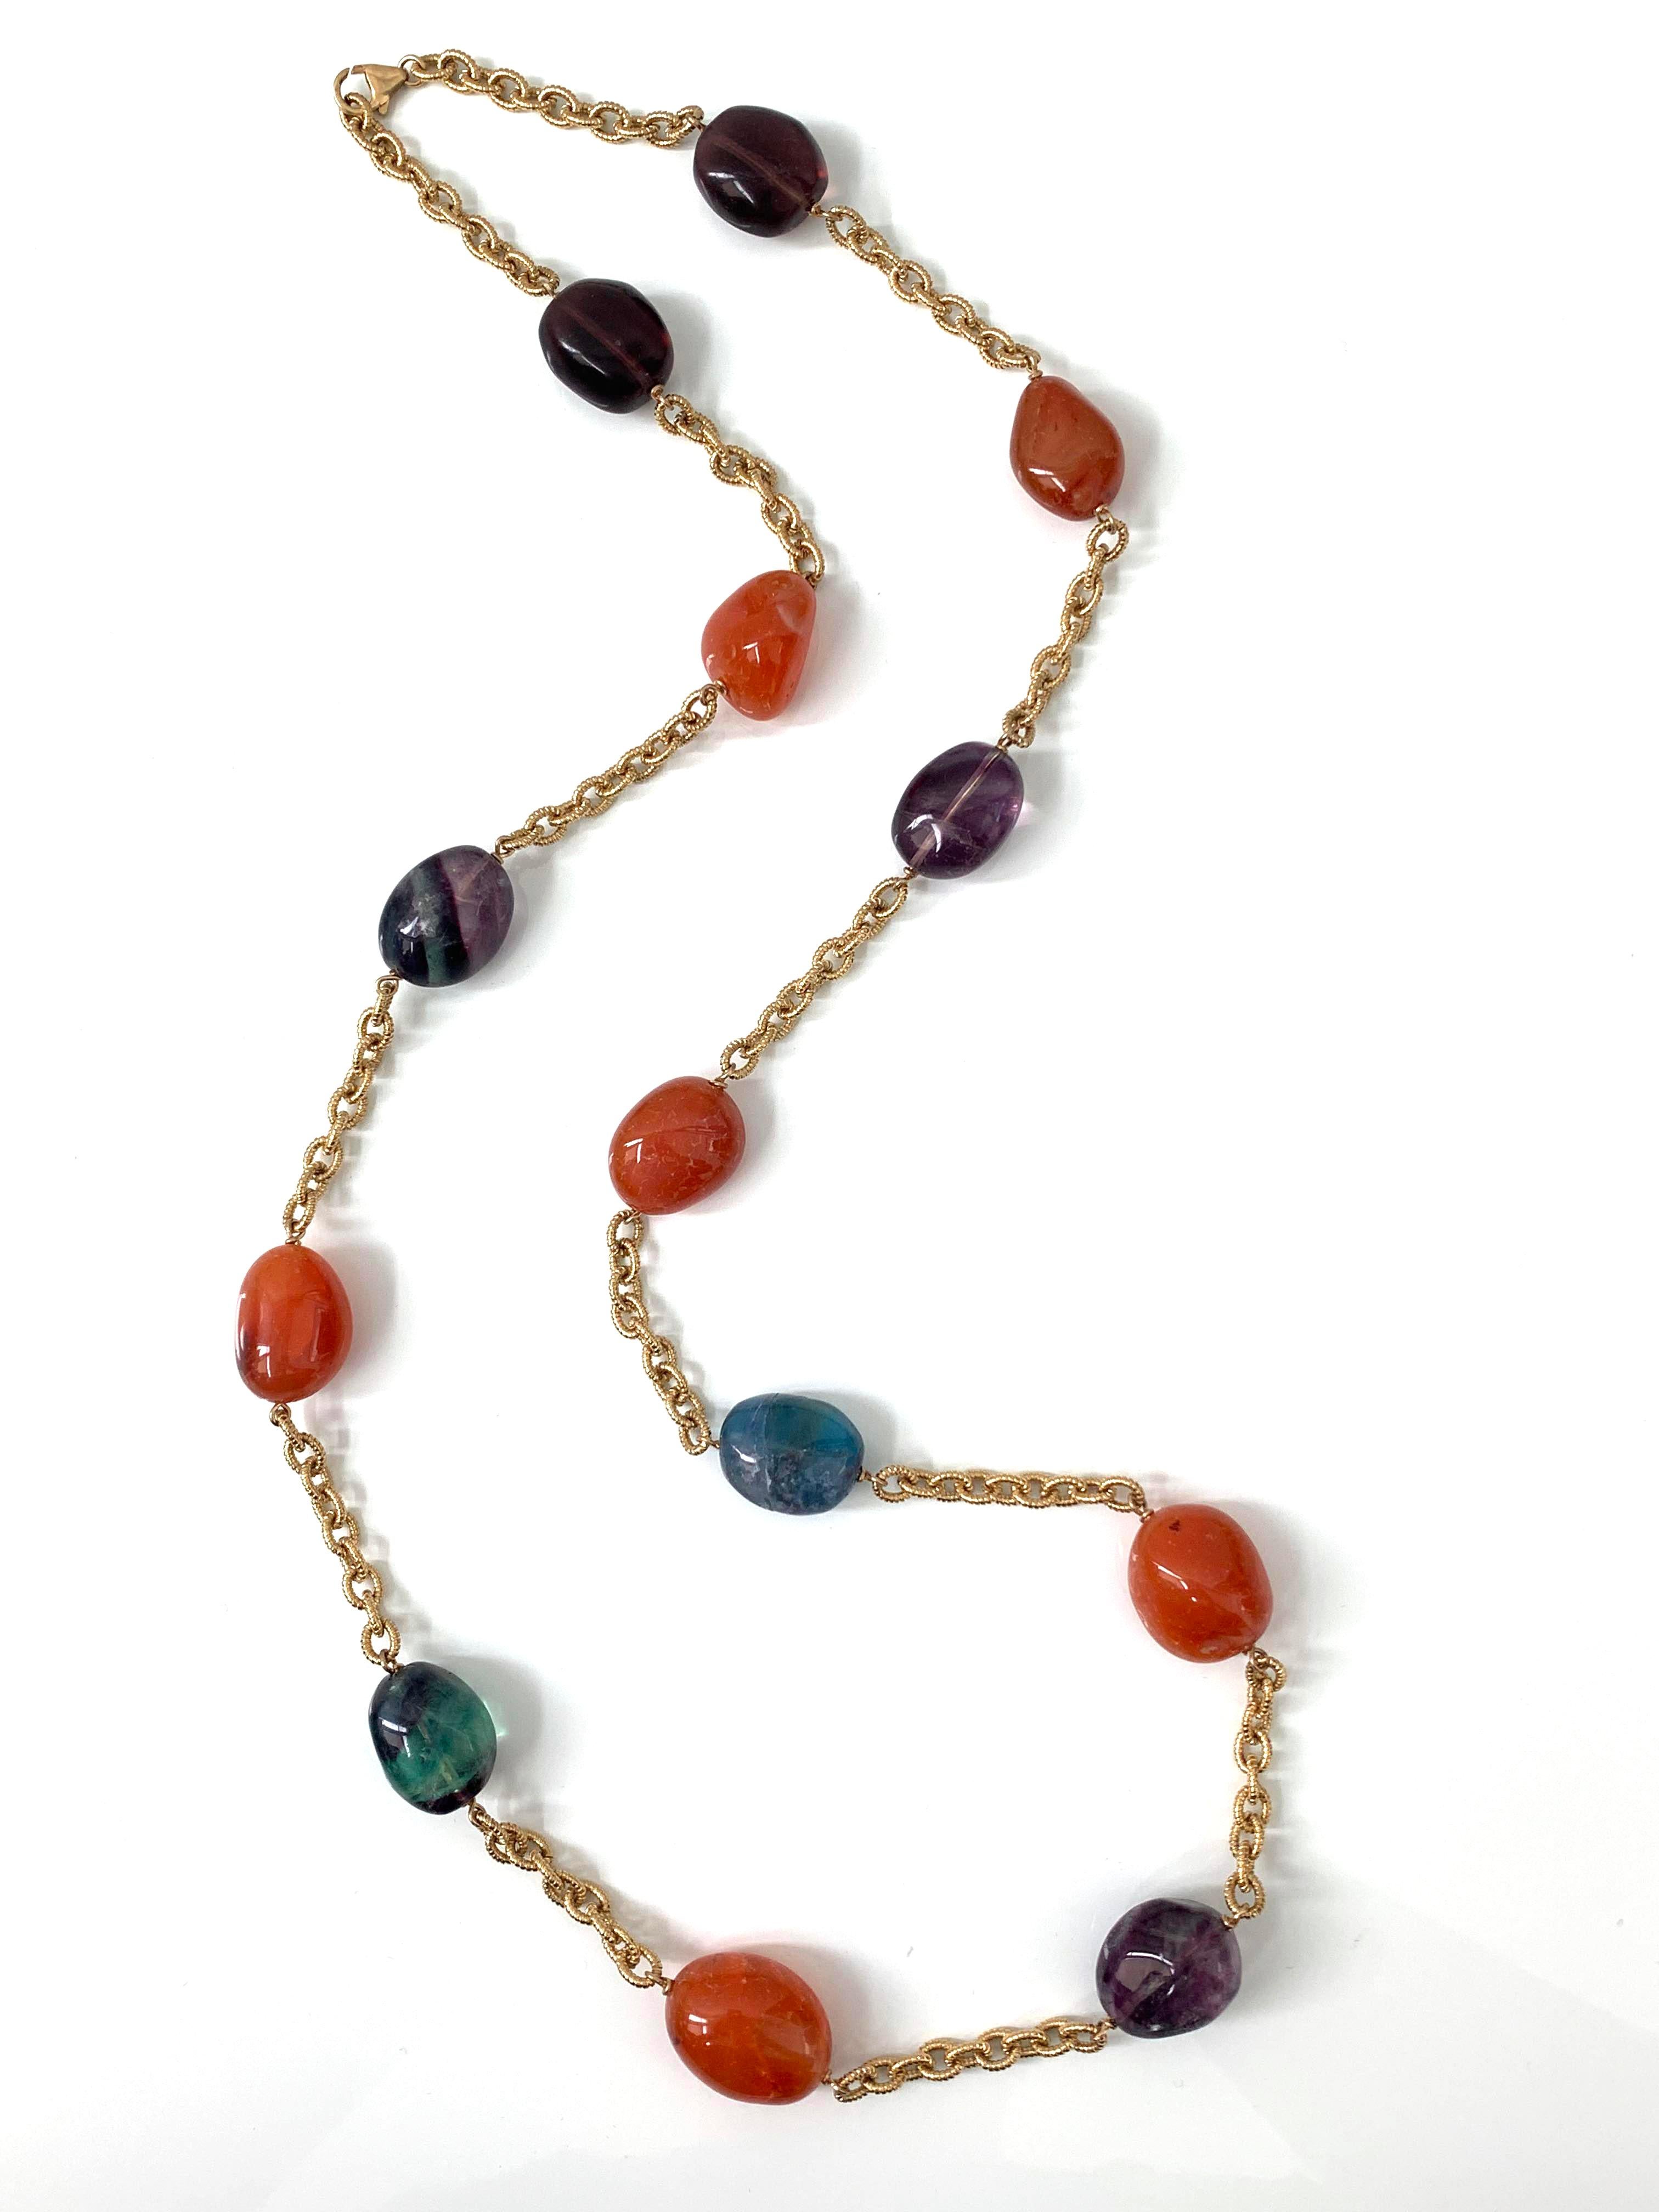 Chunky Carnelian & Bi-color Fluorite Long Chain Necklace

The necklace features 6 large tumbled carnelian and 7 large tumbled bi-color flurite. Each station is hand wire wrapped with 18k gold-filled wire and interconnected with beautiful textured